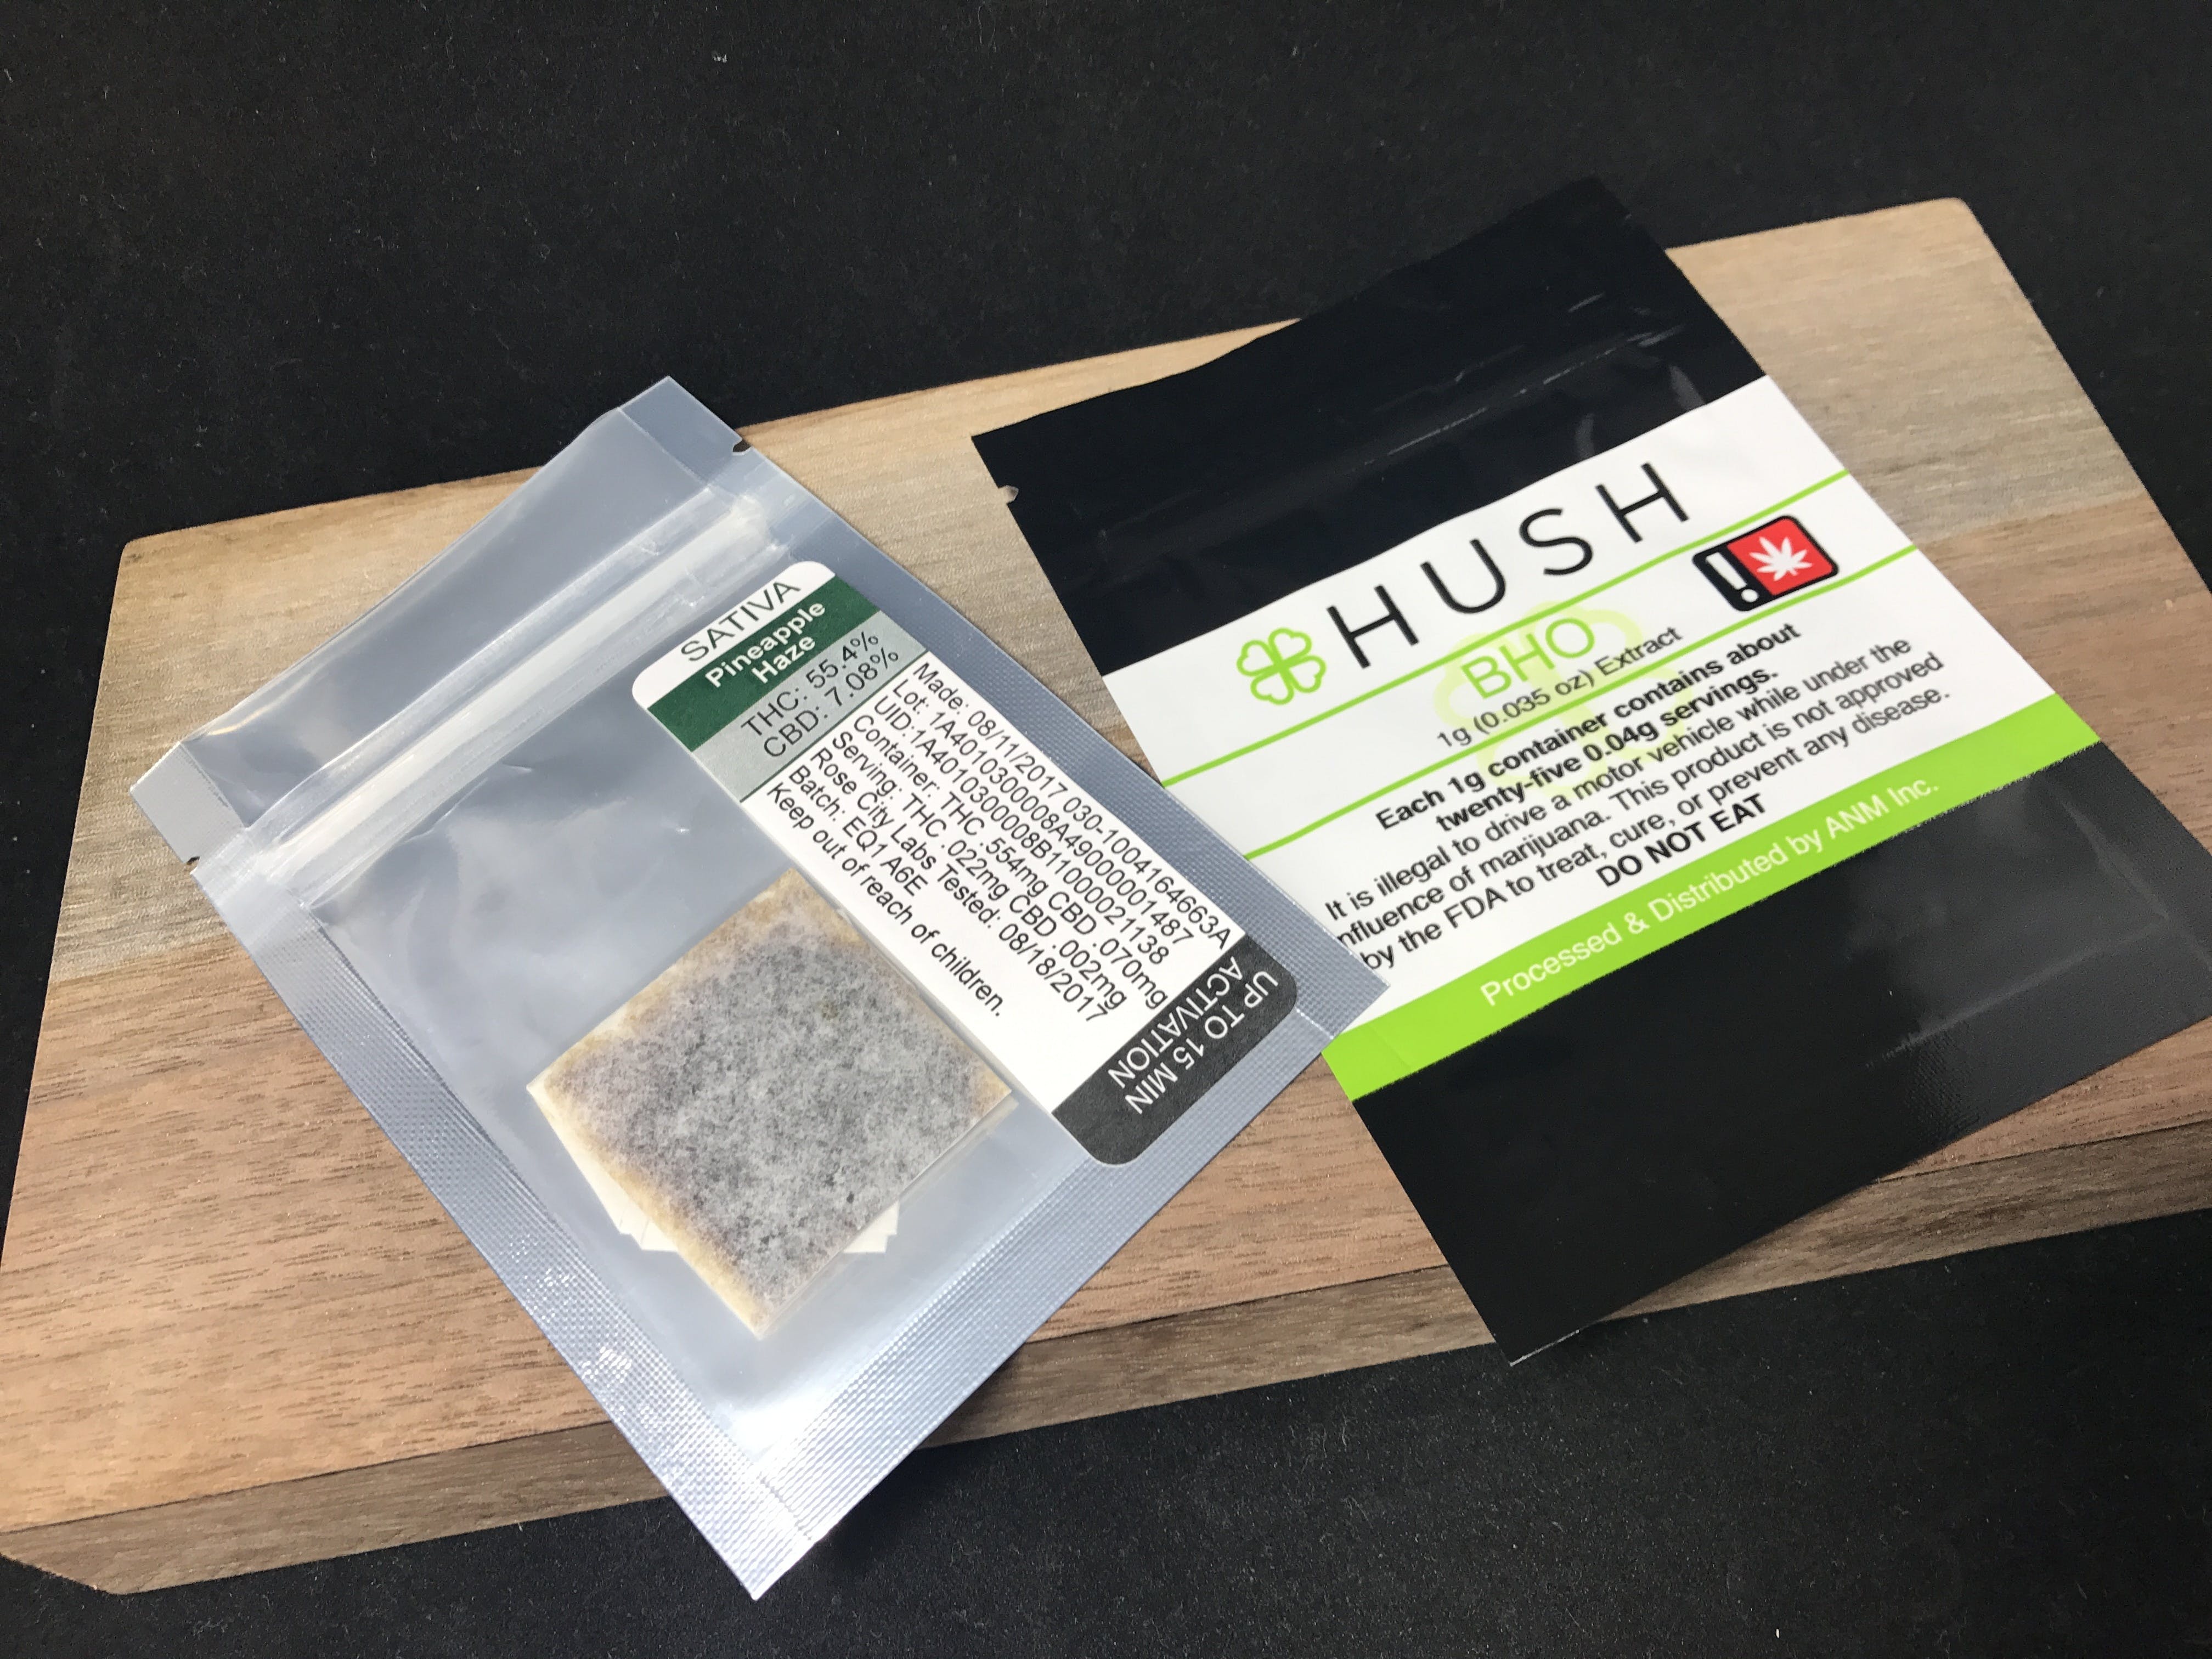 concentrate-hush-pineapple-haze-1g-shatter